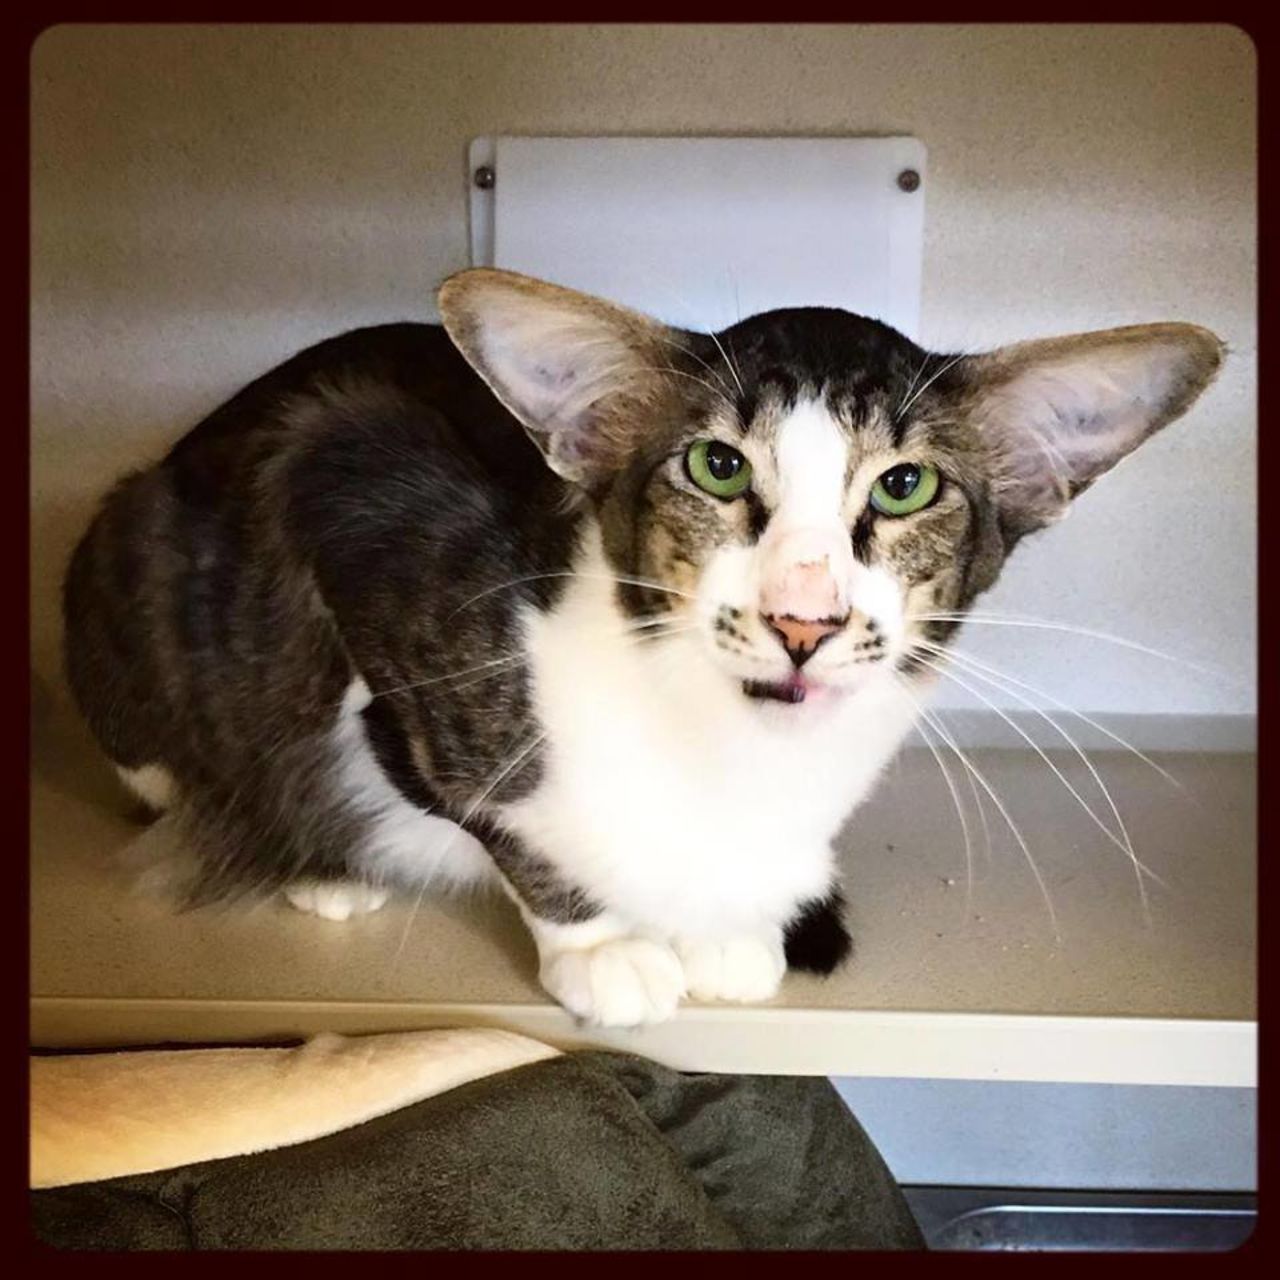 This cat, originally named Corey, took social media by storm due to his resemblance to "Star Wars: The Force Awakens" star <a href="http://time.com/4184623/kylo-ren-cat-adam-driver/" target="_blank" target="_blank">Adam Driver.</a> Within a few days, he was adopted and renamed Kylo Ren, the name of Driver's character in the movie.